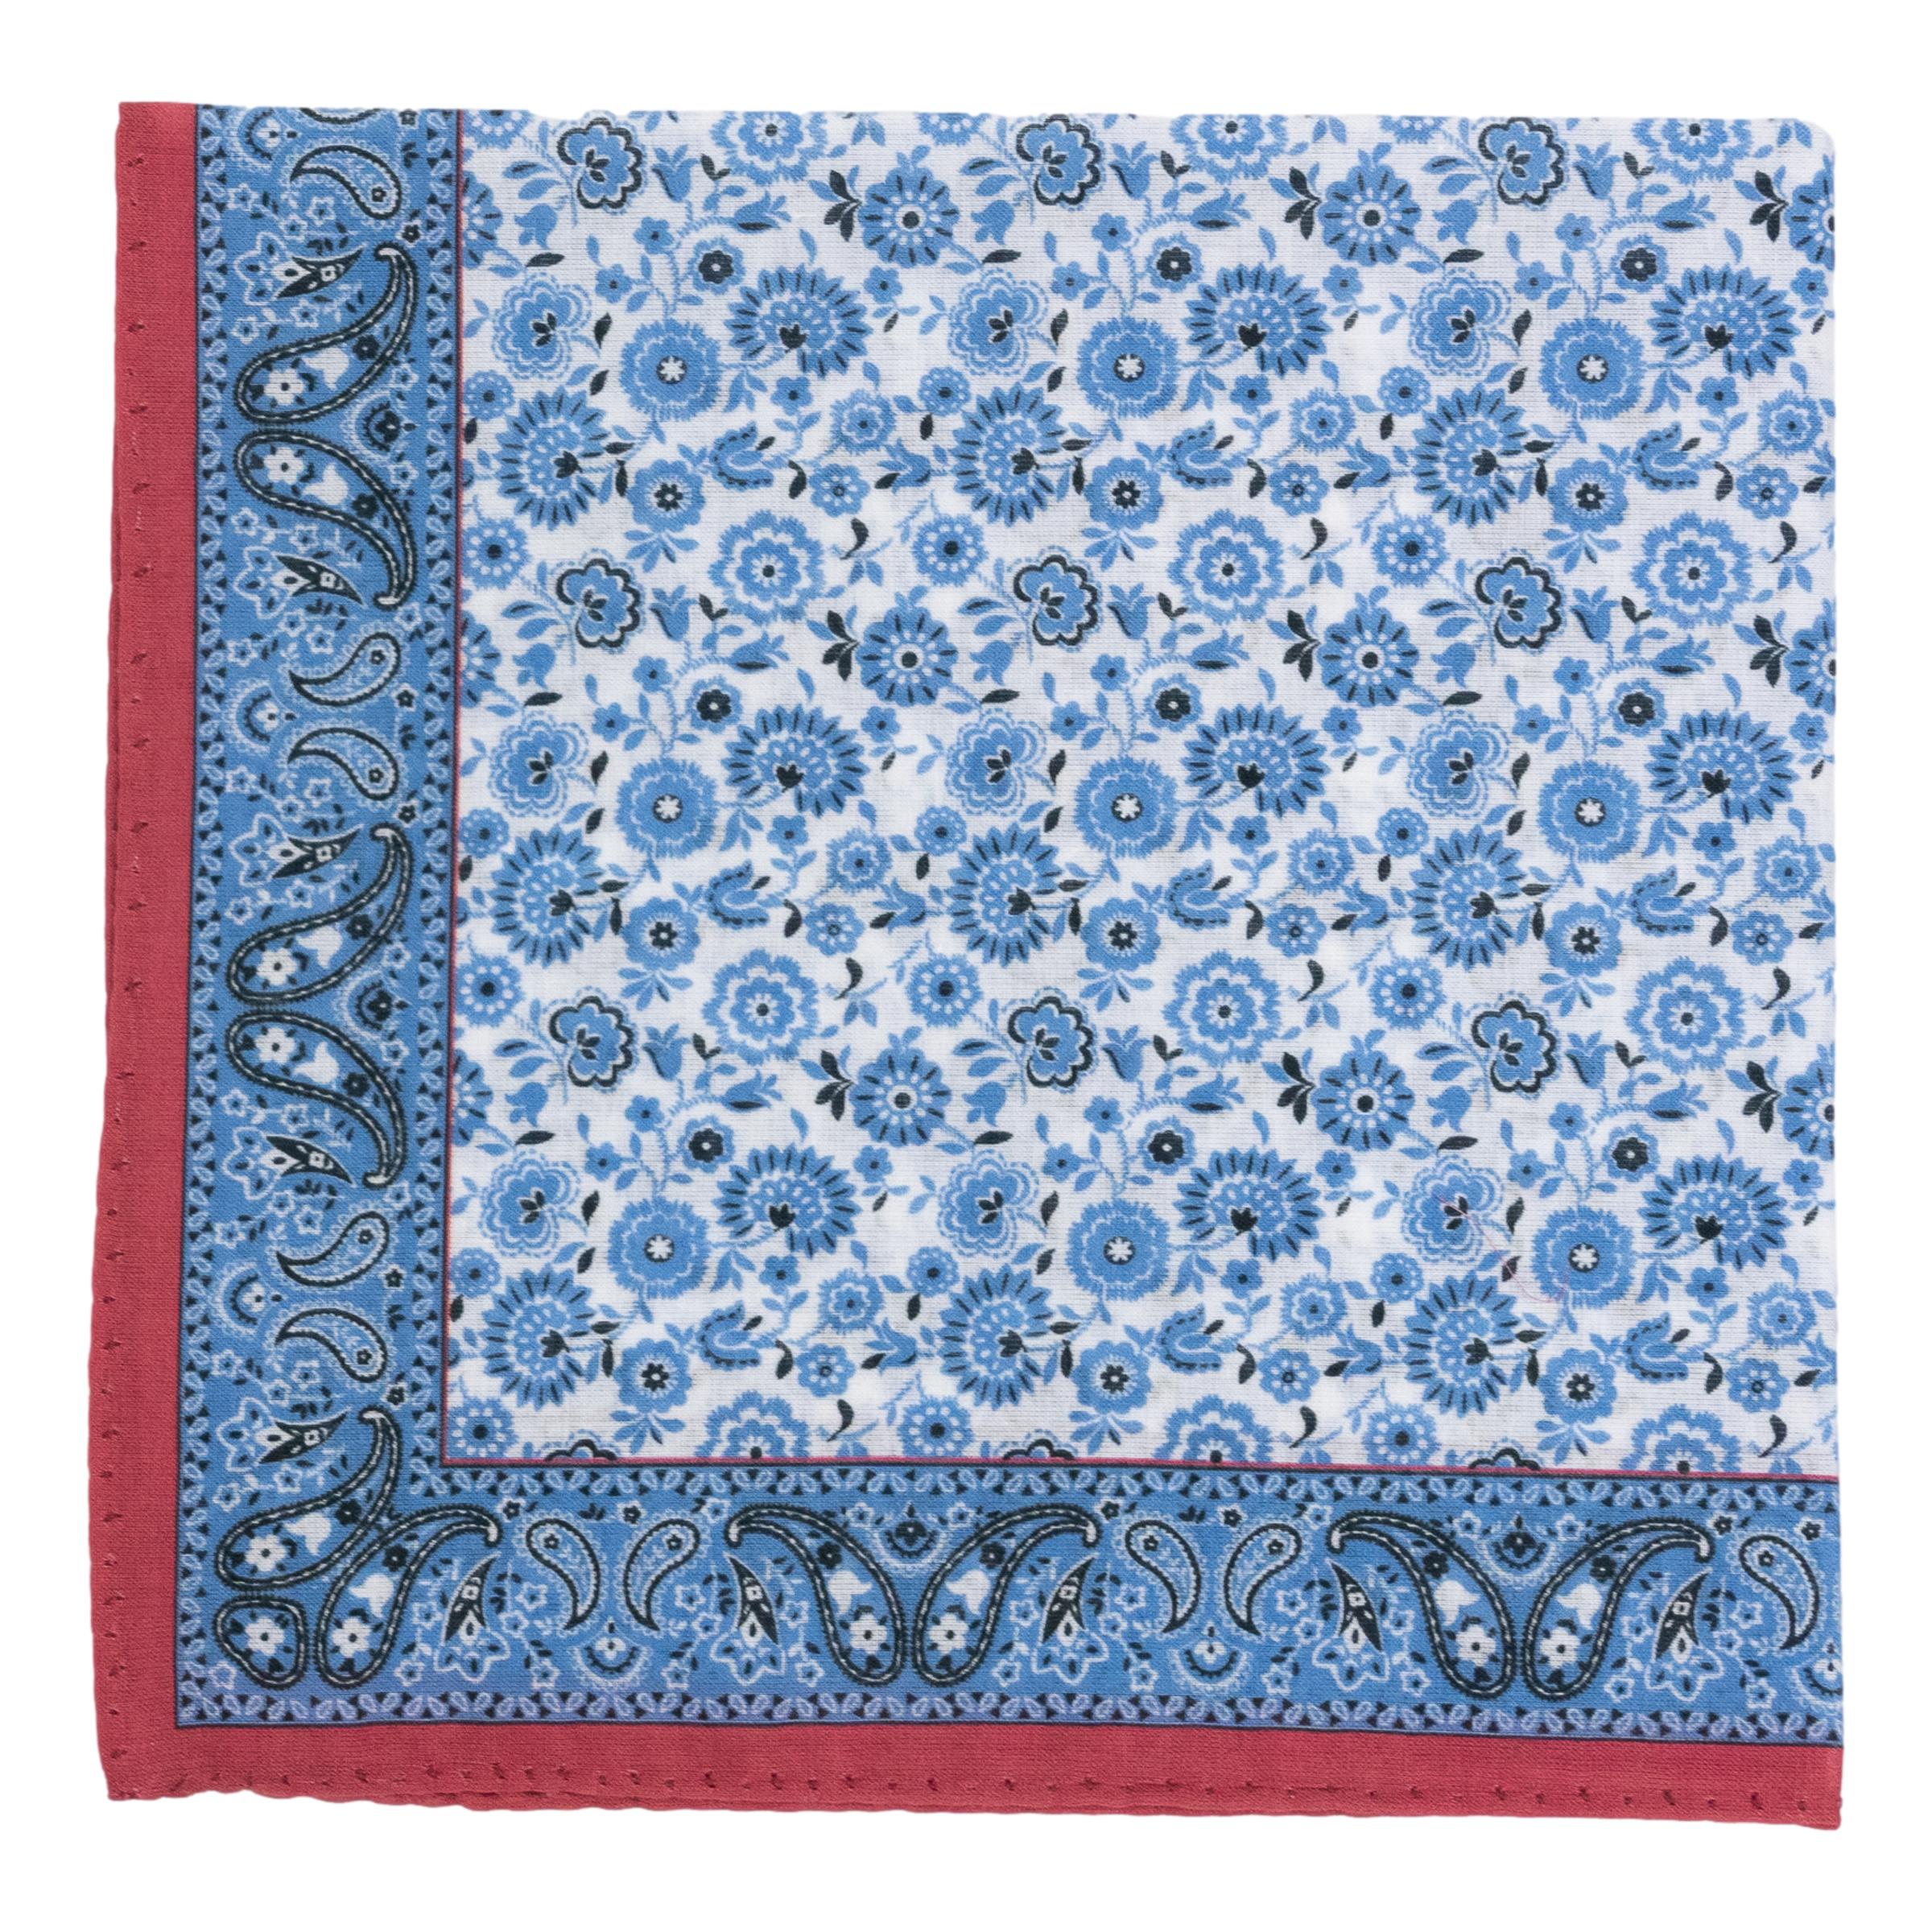 Floral Pattern with Paisley Border Fine Cotton Pocket Square